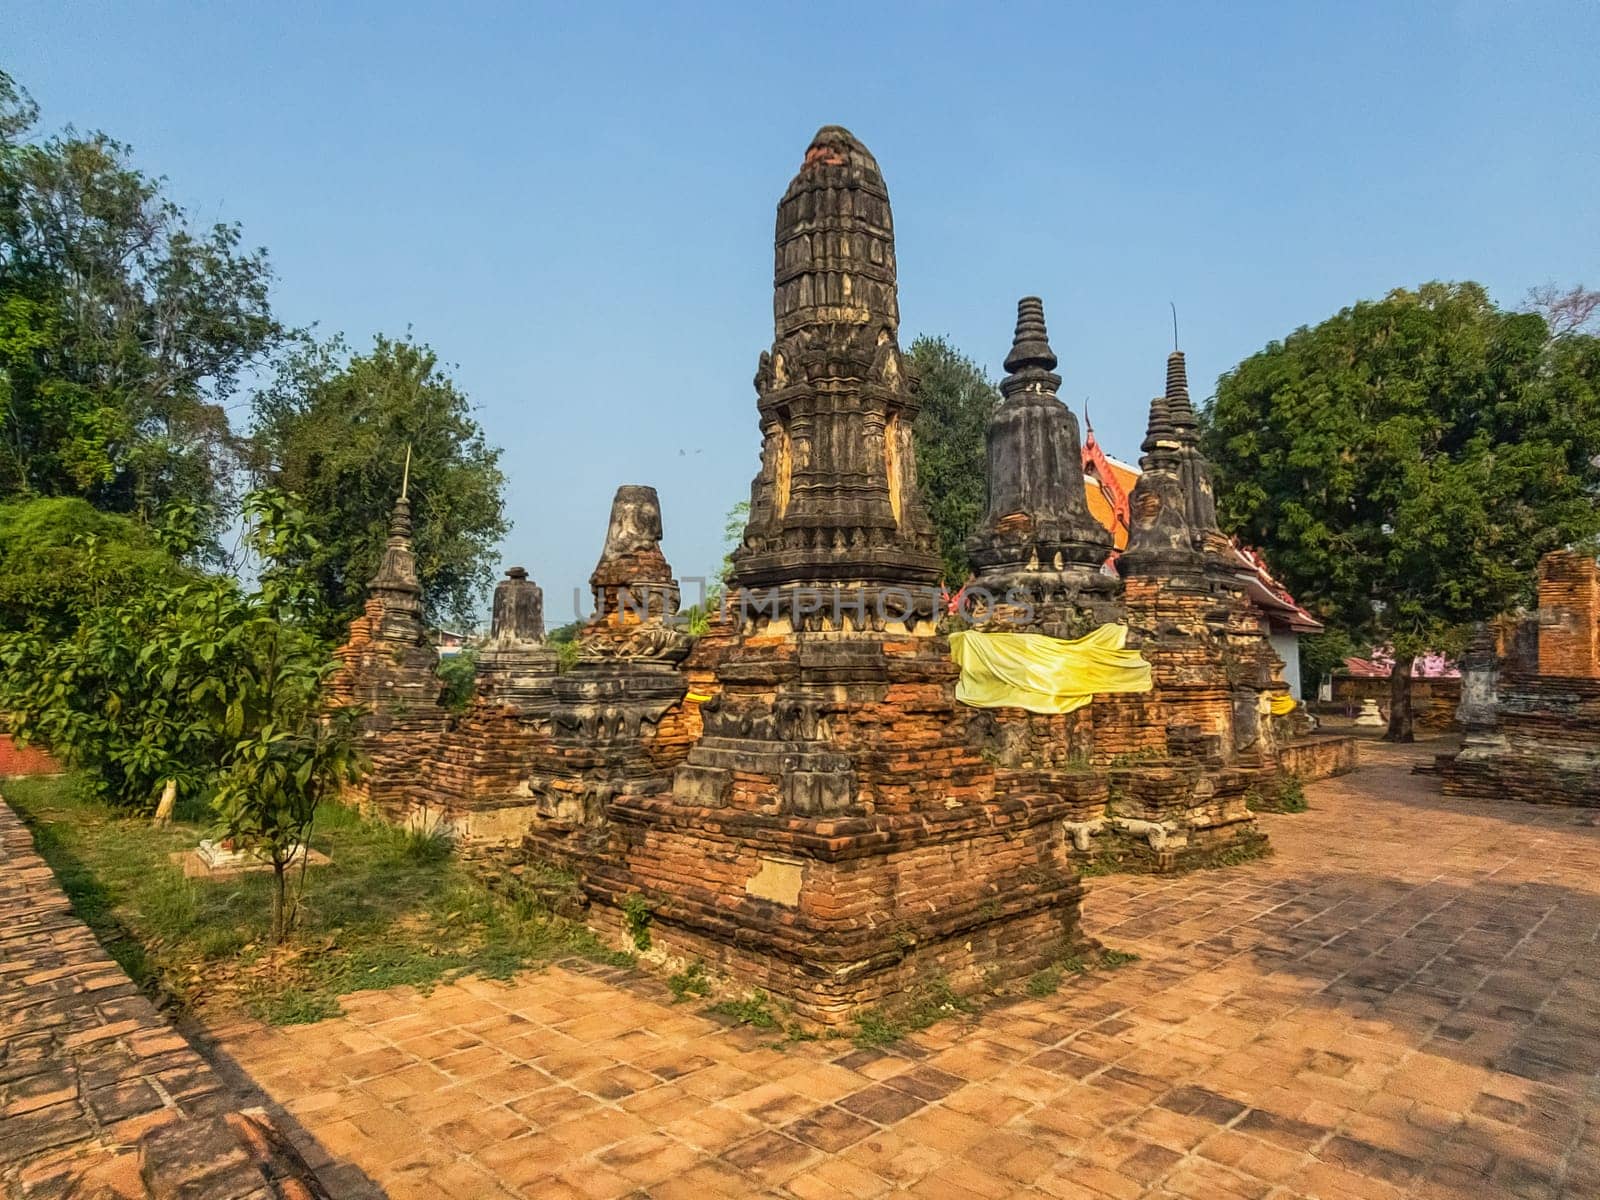 Wat Cherng Tha temple, Unesco World Heritage site, in Phra Nakhon Si Ayutthaya, Thailand by Elenaphotos21